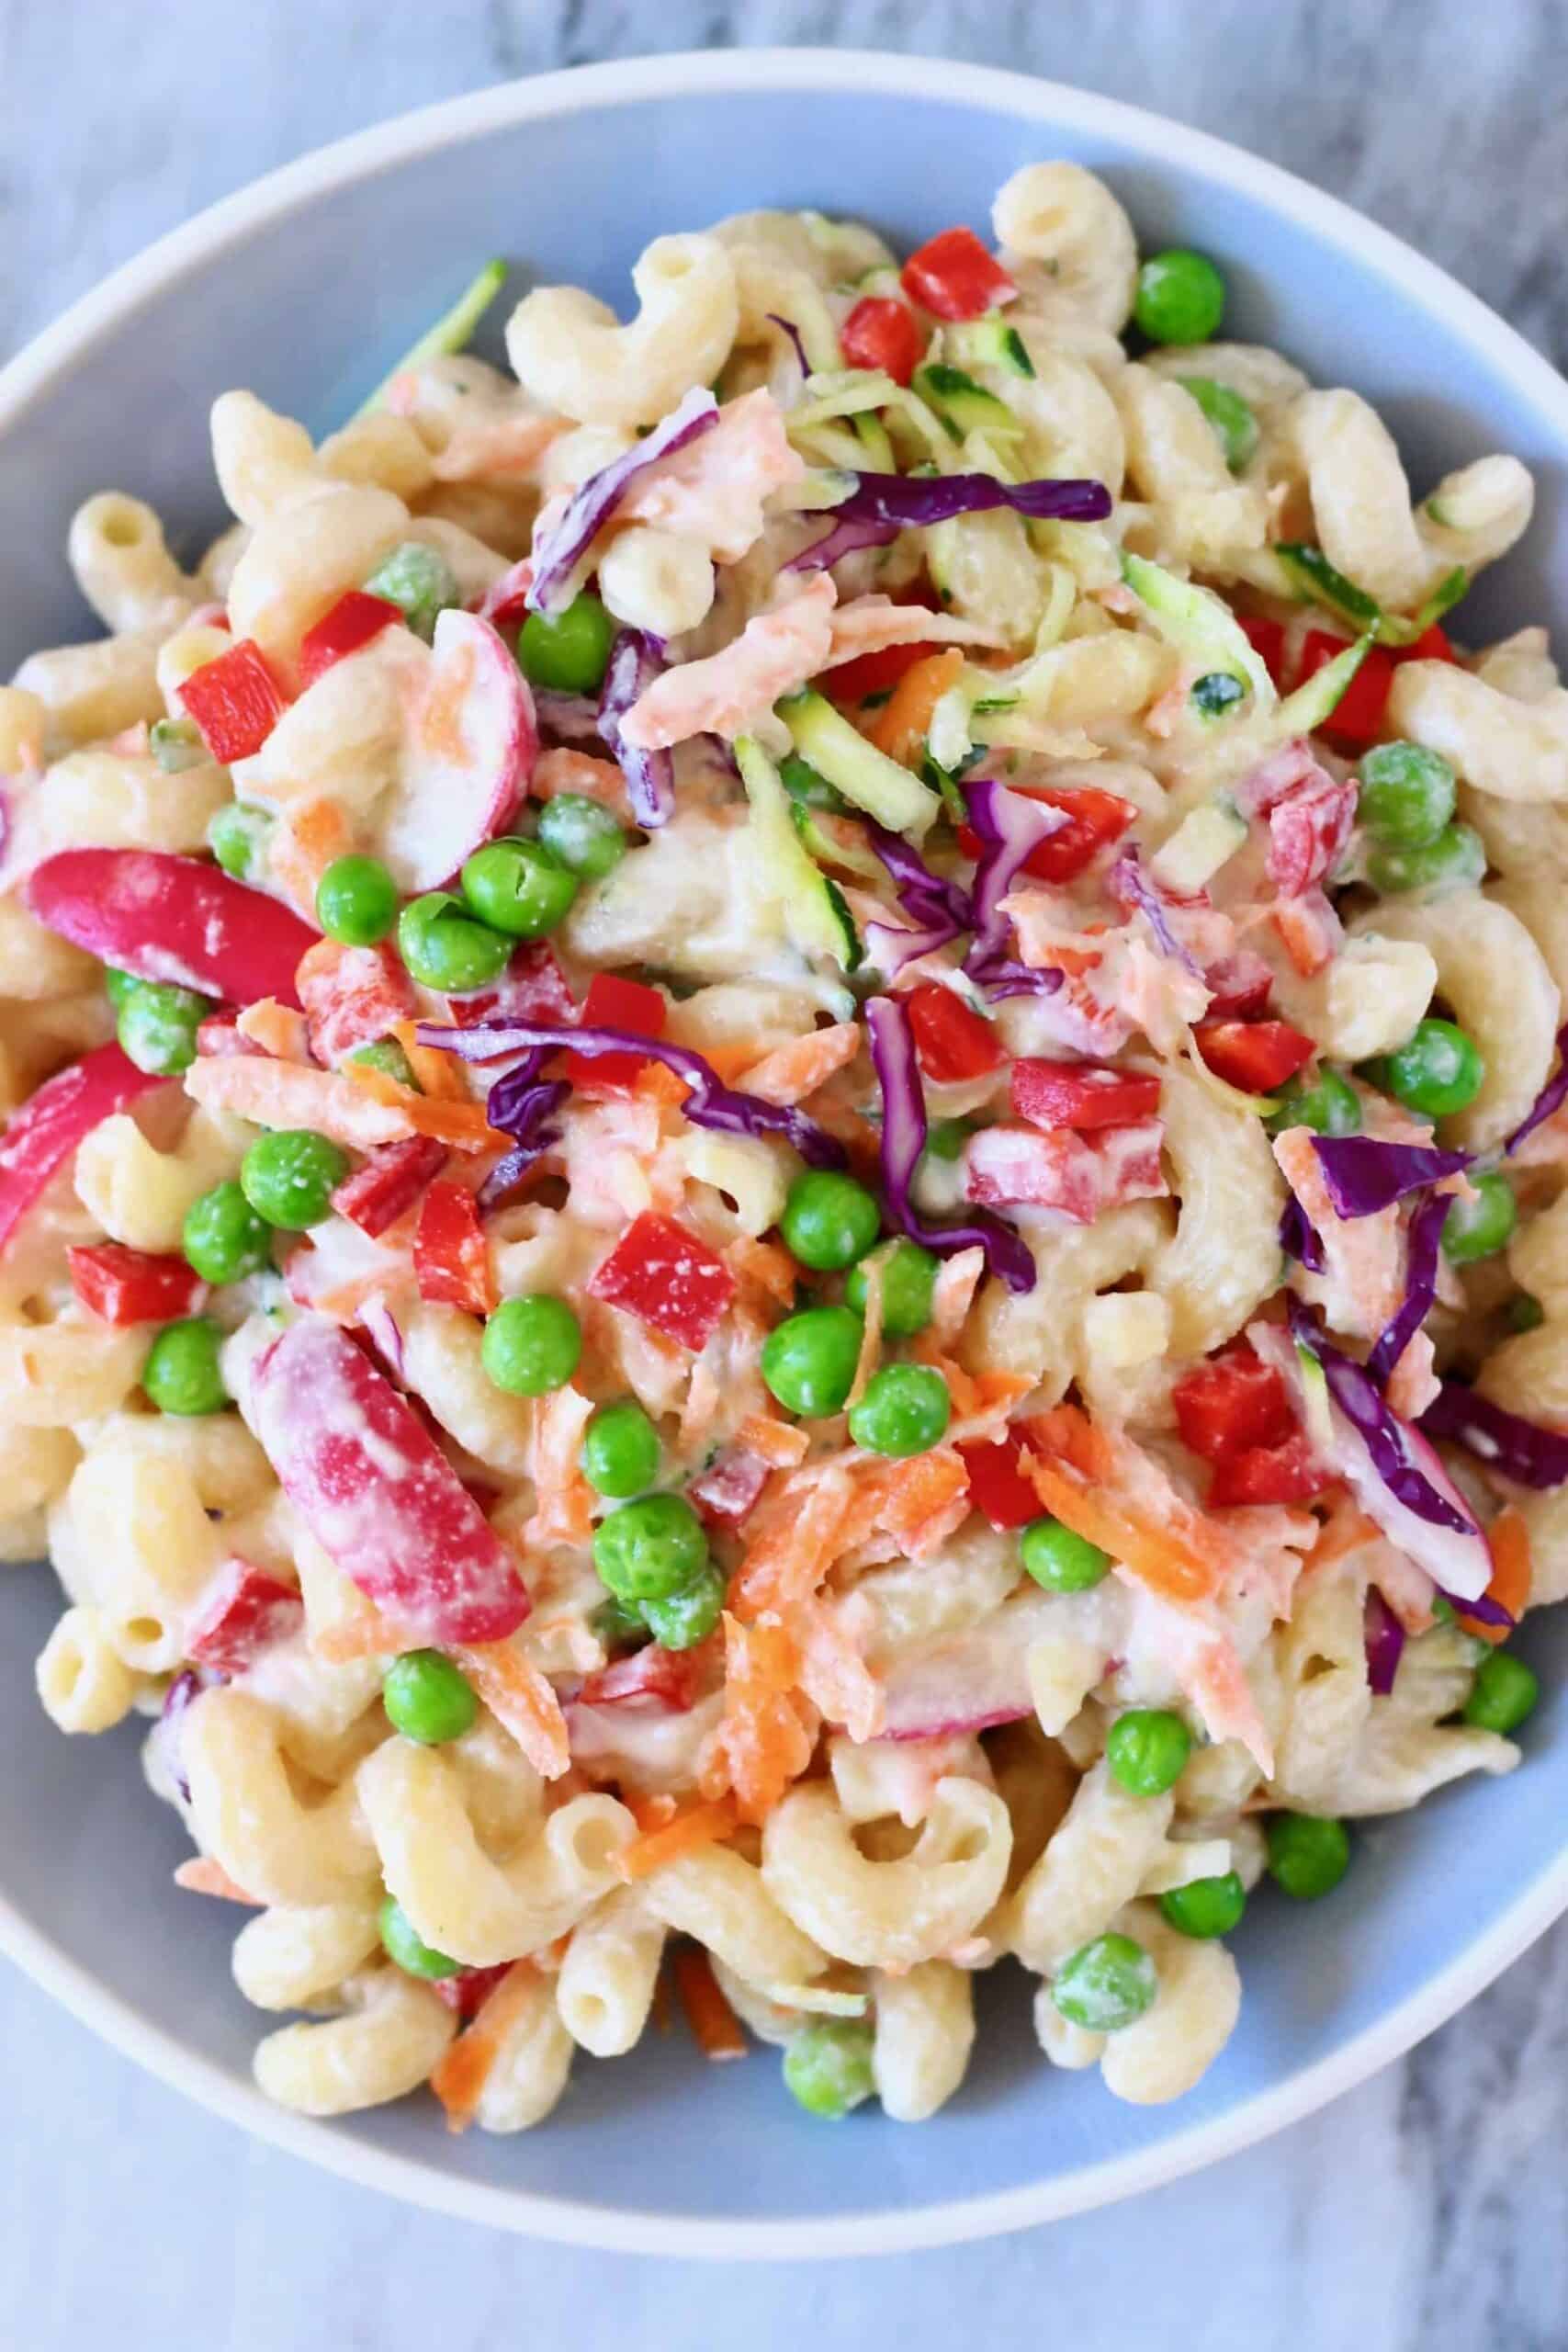 Pasta salad with green peas, shredded cabbage, radish and carrots in a mayonnaise dressing in a light blue bowl against a marble background